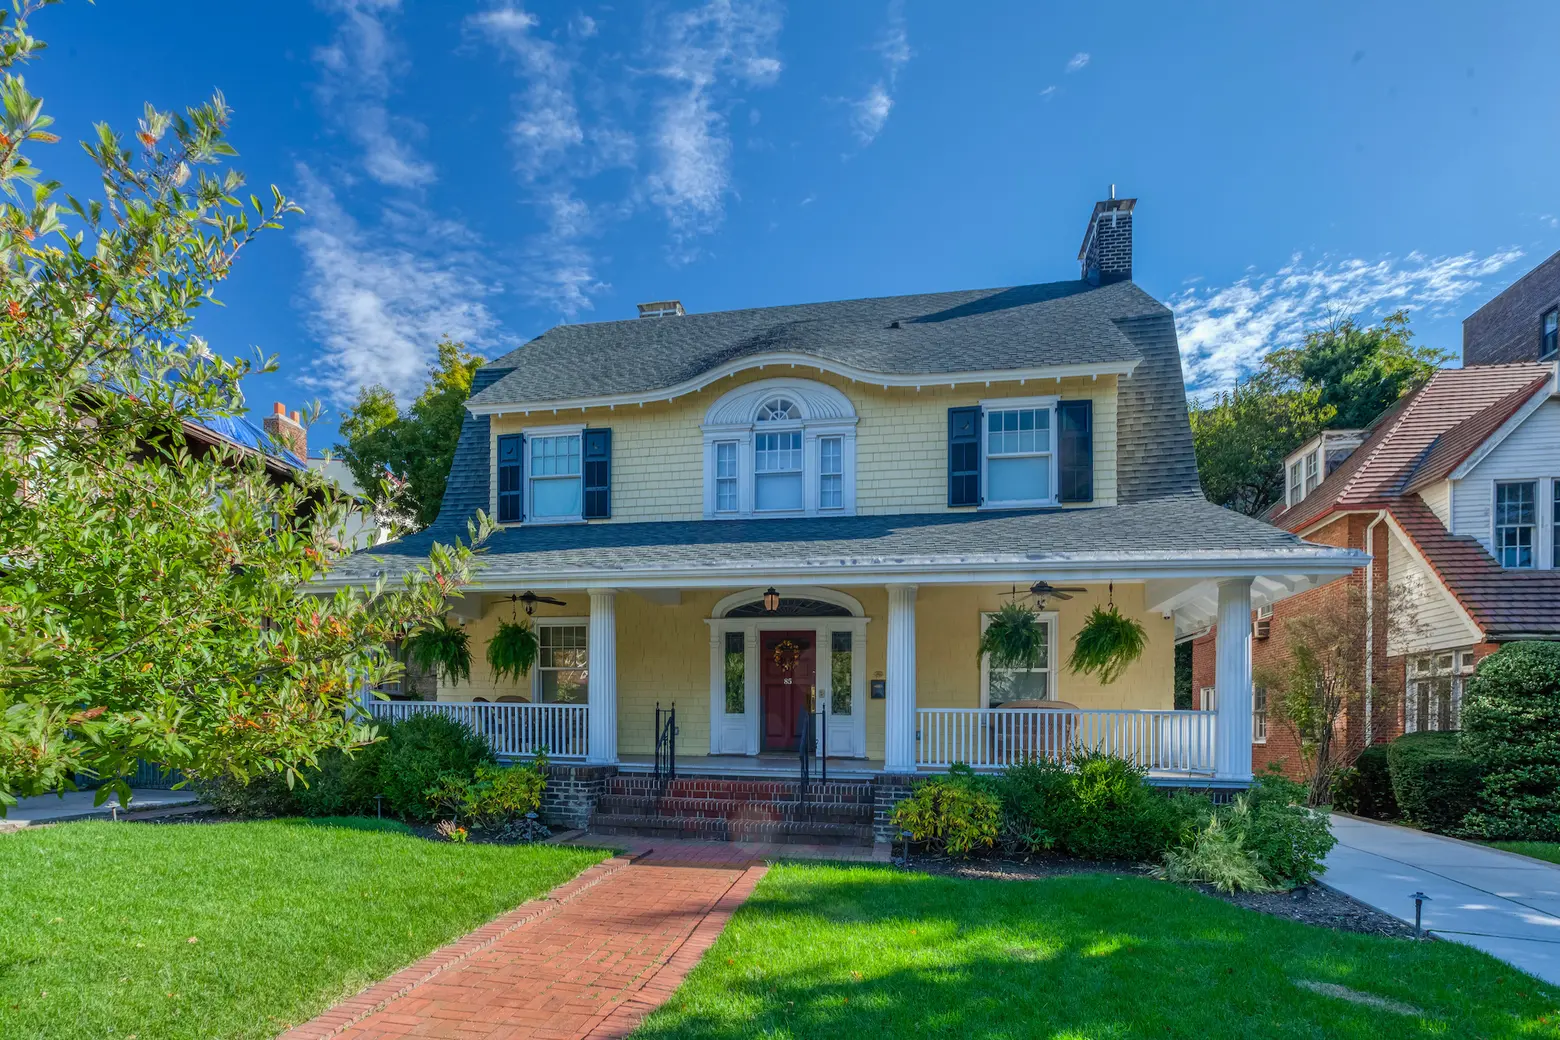 For $3.9M, this Prospect Park South Dutch Colonial has an ‘enchanted forest’ and 7 bedrooms